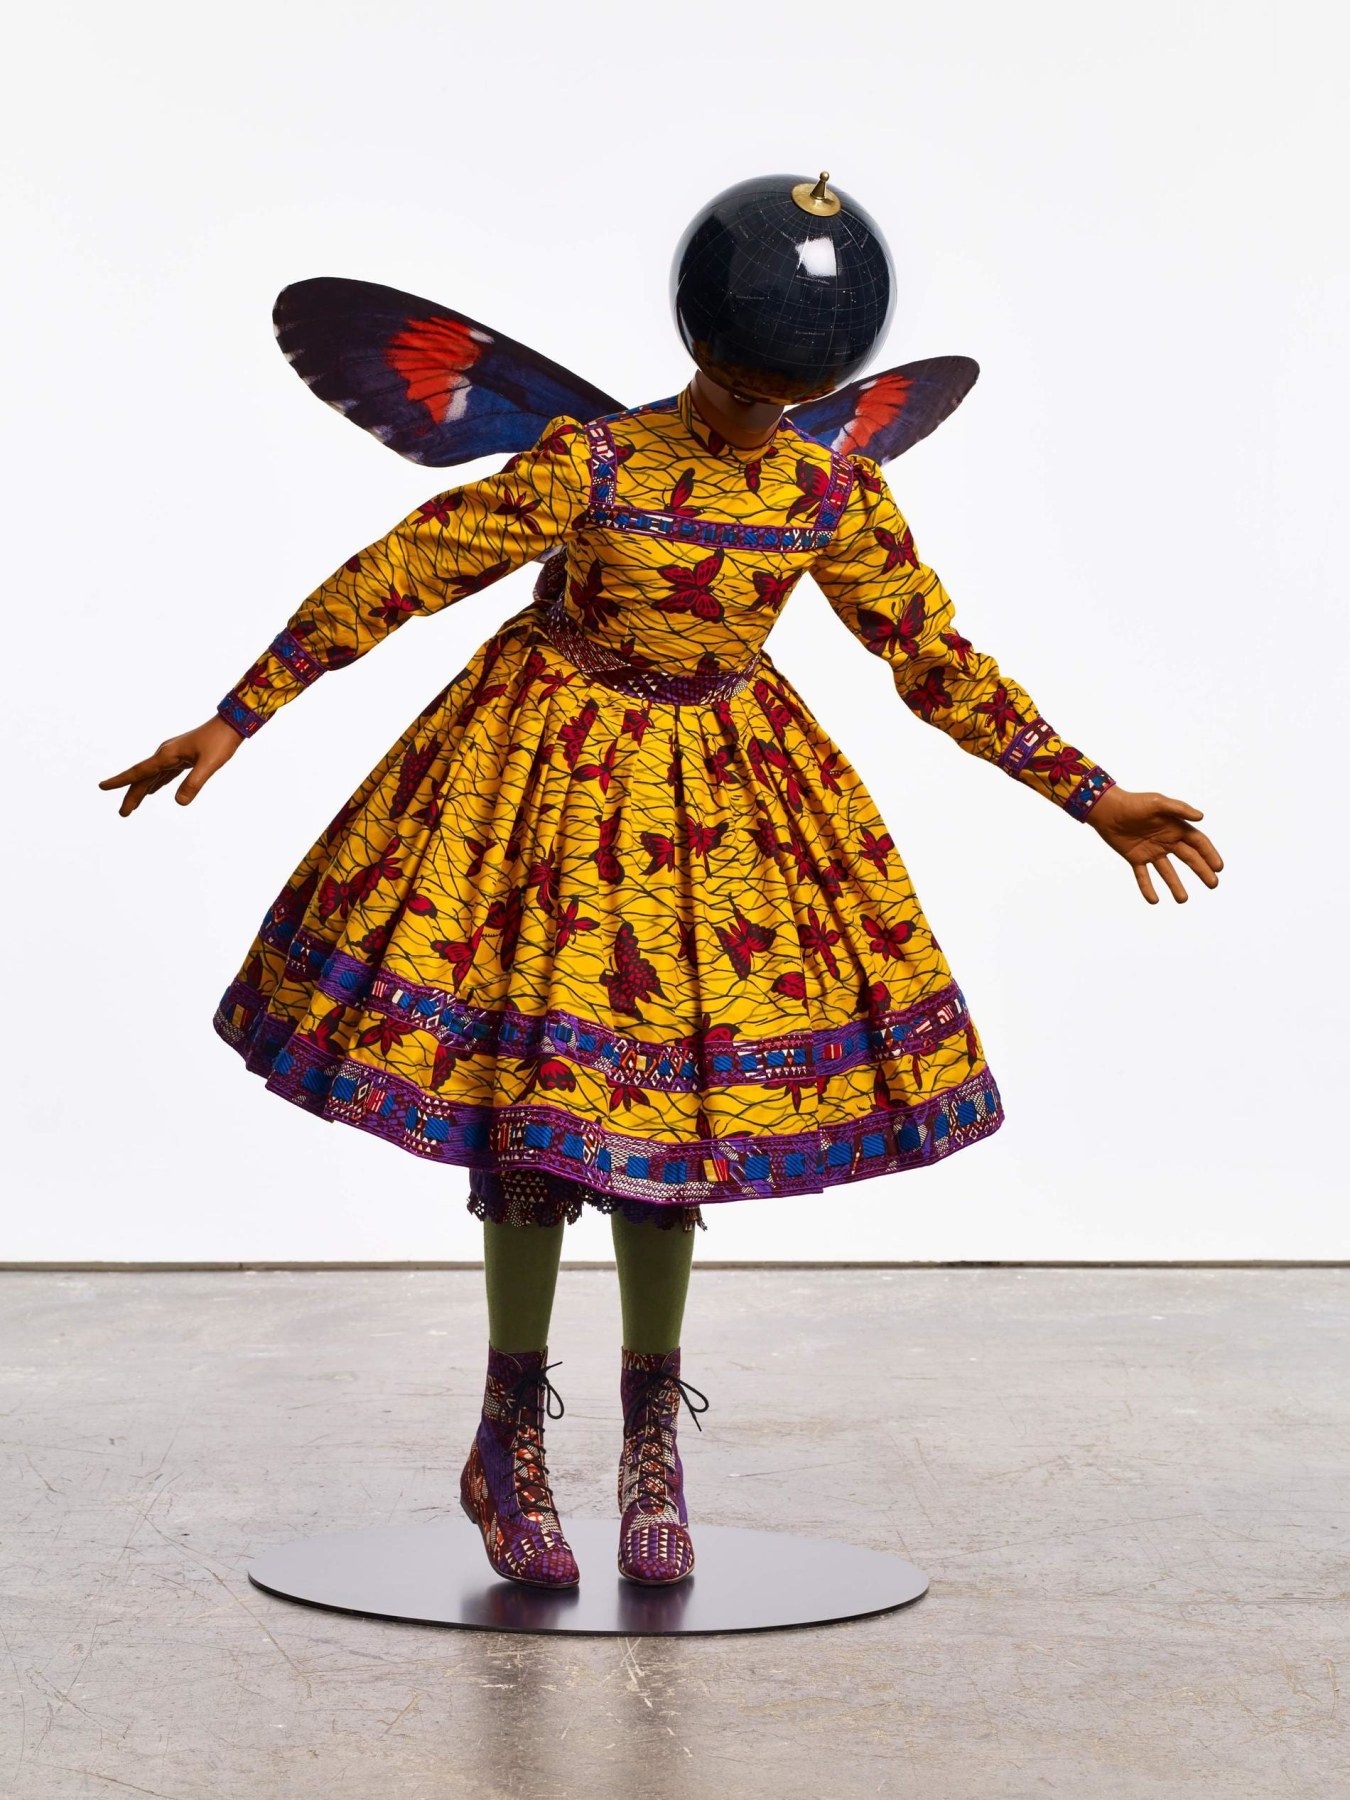 mannequin with a globe for a head with butterfly wings